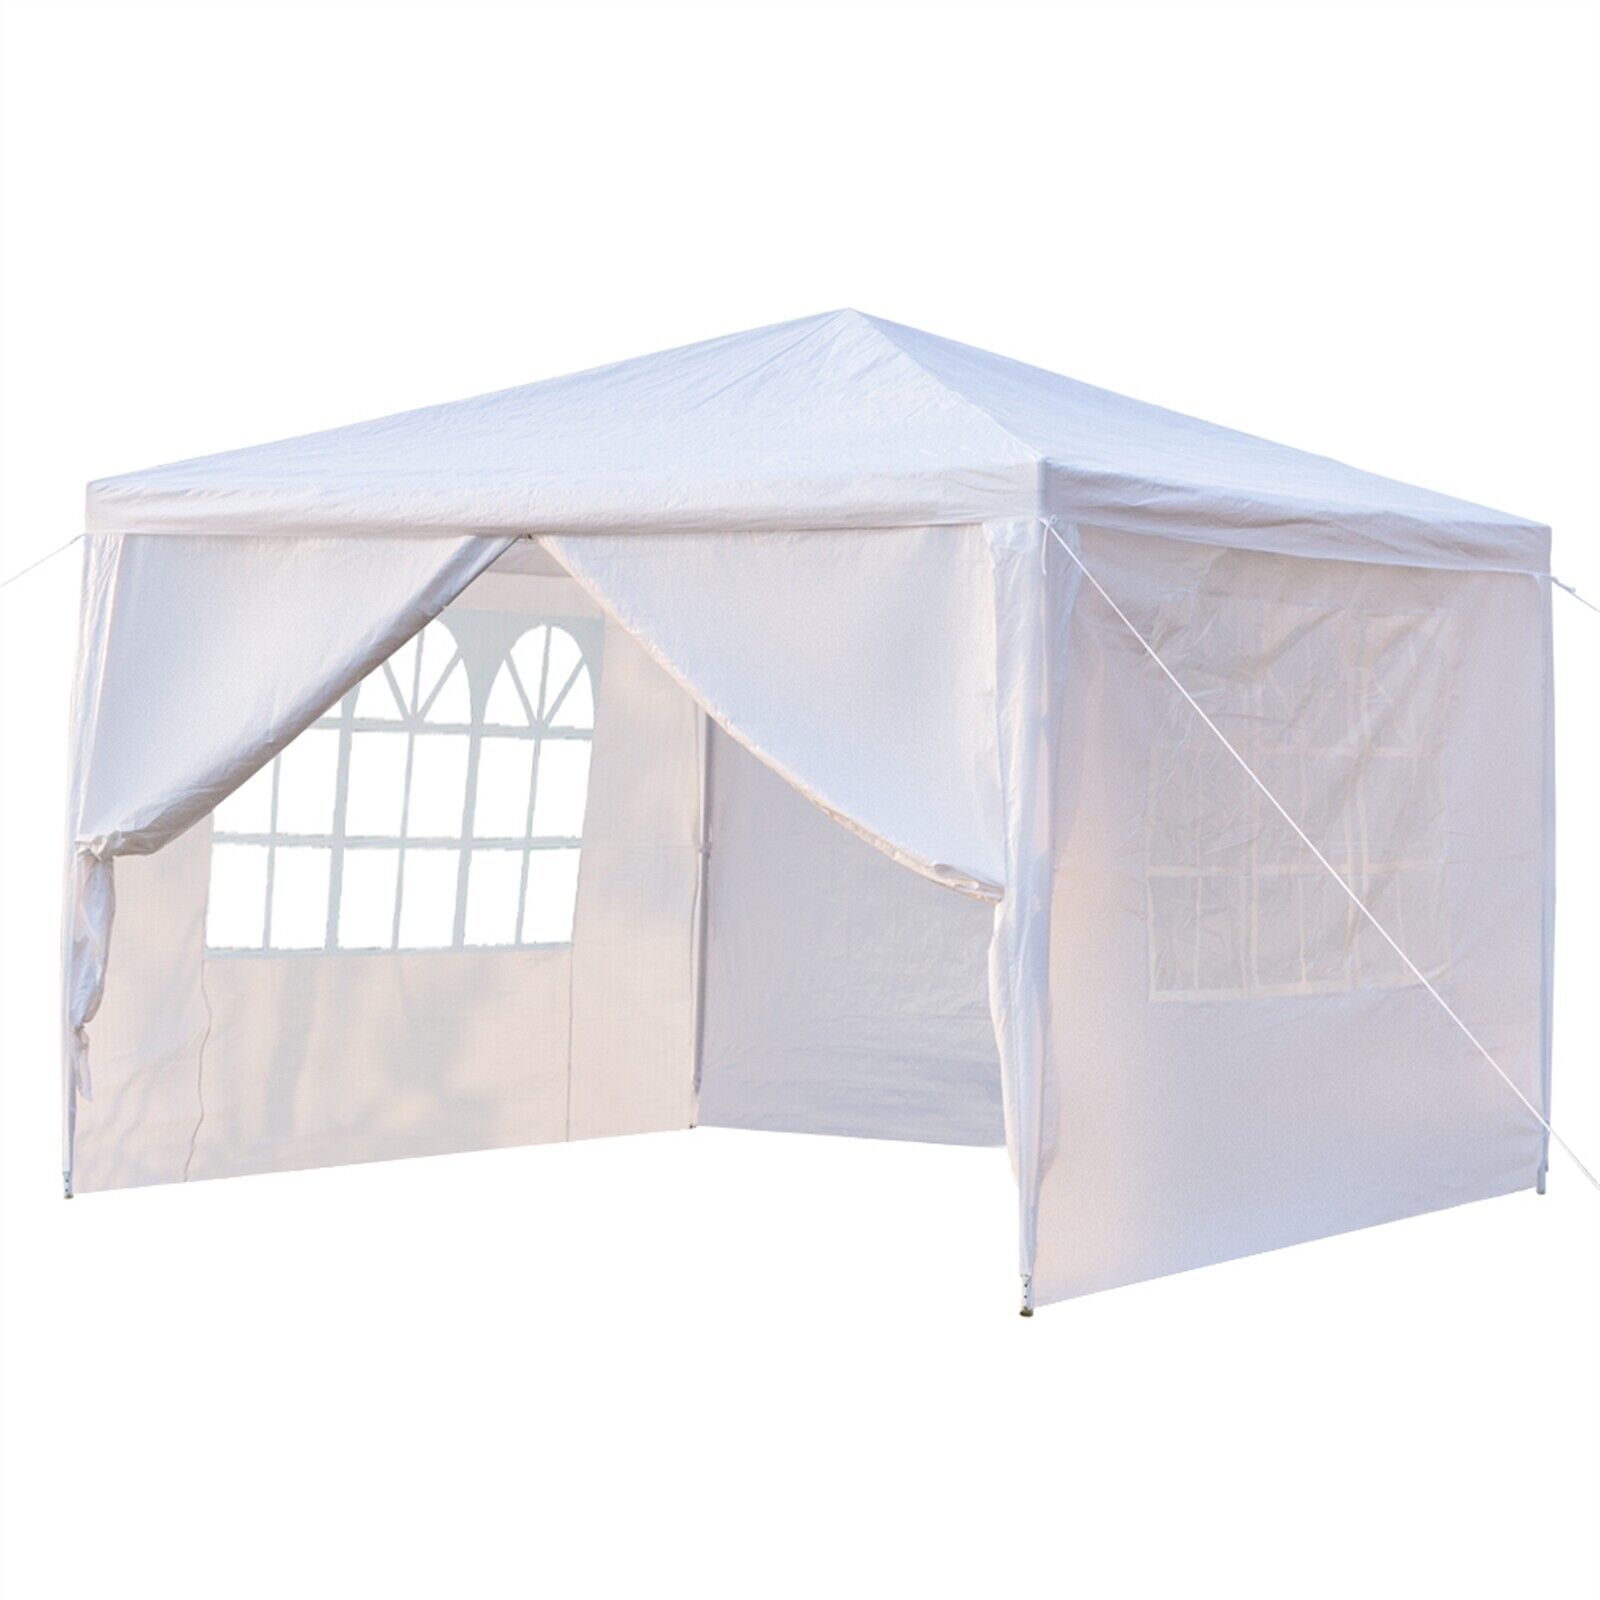 Heavy Duty Canopy Party 10"x10" Outdoor Wedding Tent Gazebo with 4 Side Walls